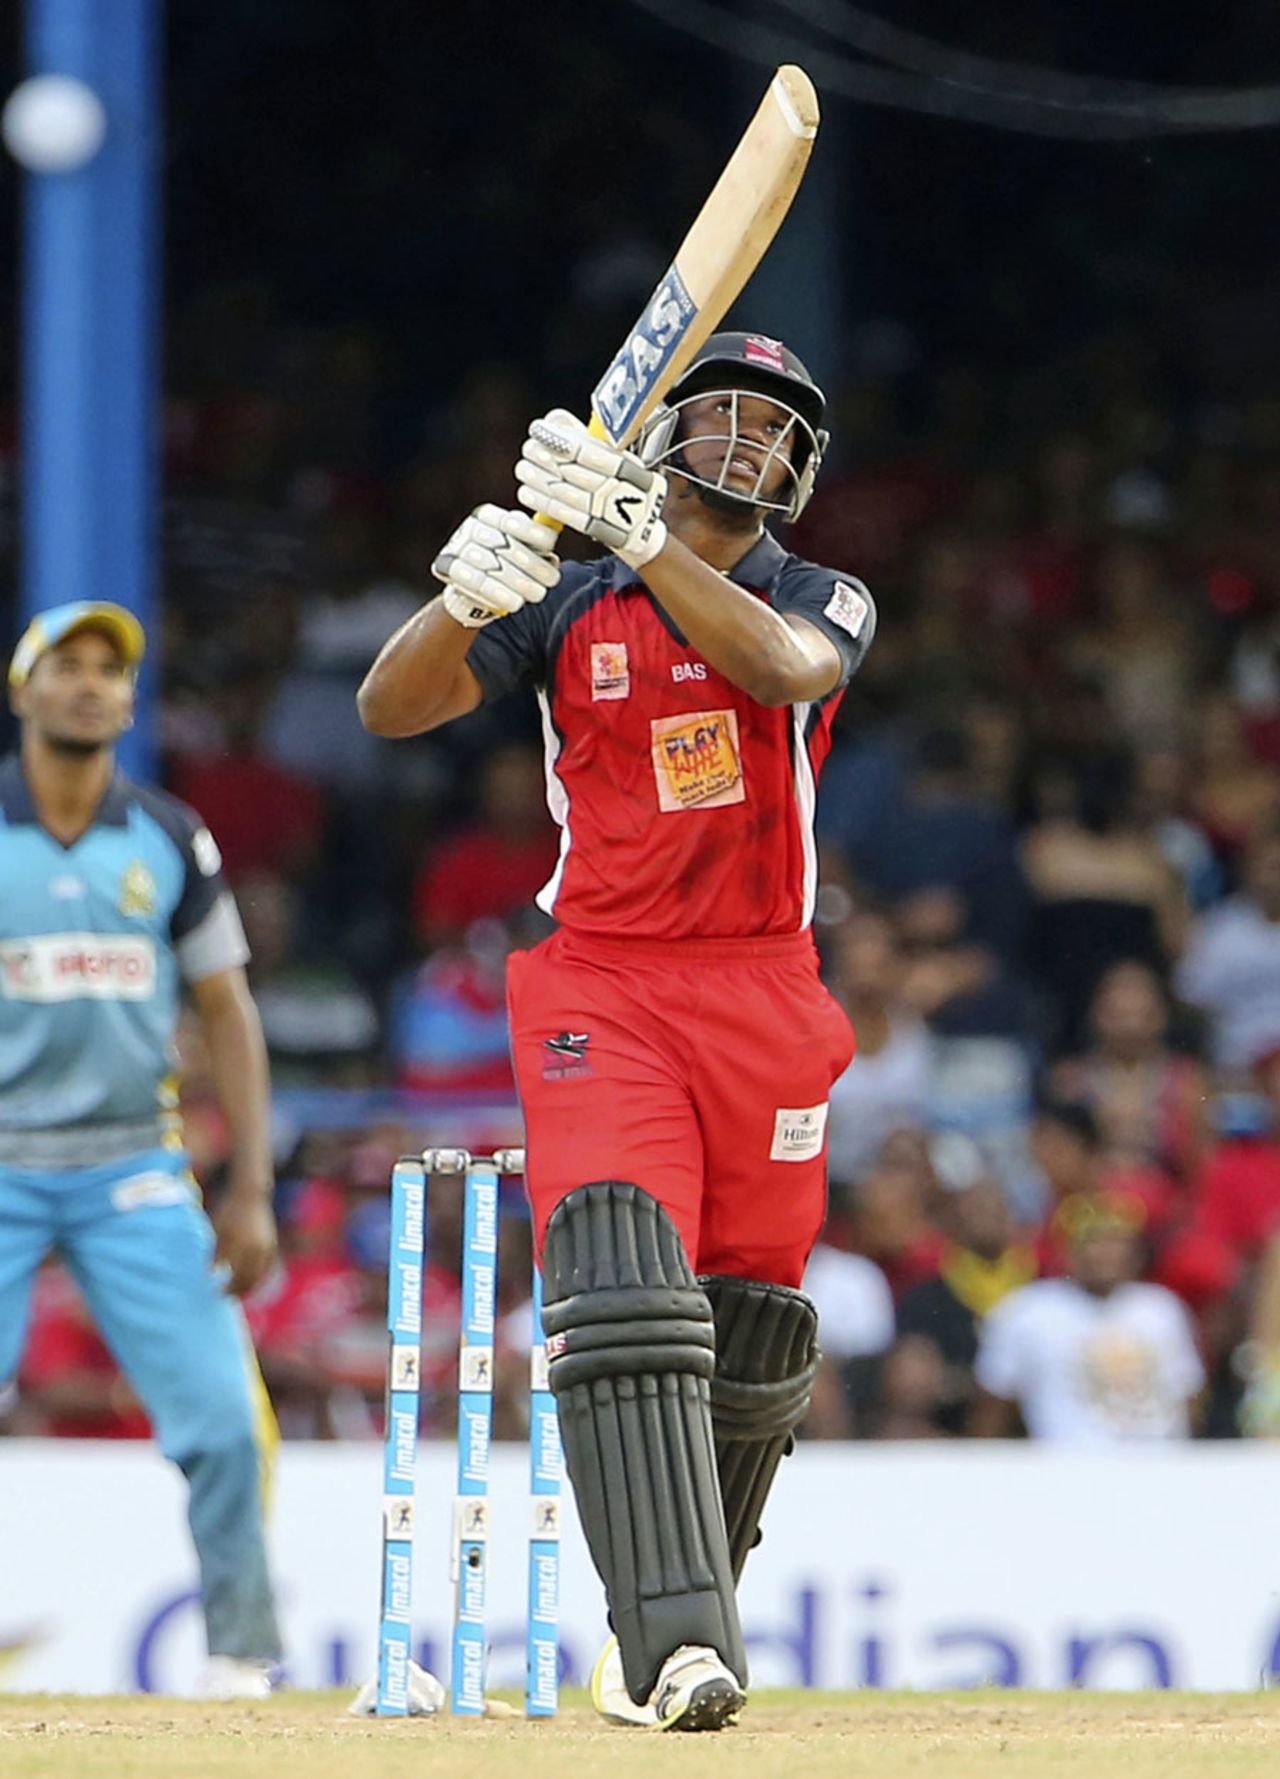 Evin Lewis plays a lofted shot down the ground, Trinidad & Tobago Red Steel v St Lucia Zouks, CPL 2014, Port-of-Spain, July 27, 2014